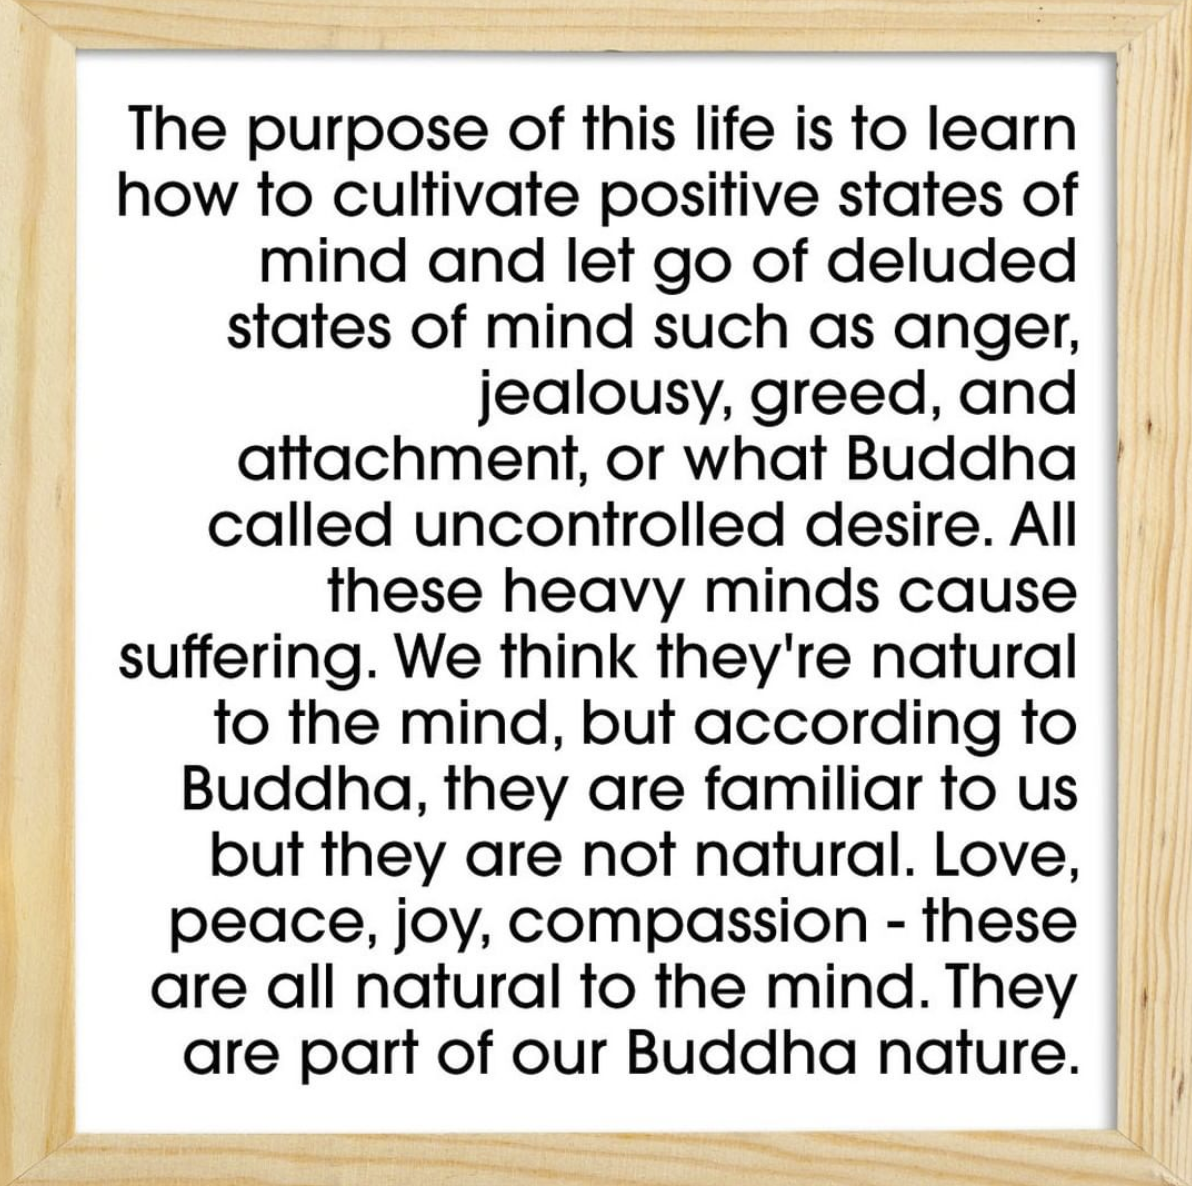 The purpose of this life is to learn how to cultivate positive states of mind and let go of deluded states of mind such as anger, jealousy, greed, and attachment. All these heavy minds cause suffering. We think they're natural to the mind, but according to Buddha, they are familiar to us but they are not natural. Love, peace, joy, compassion - these are all natural to the mind. They are part of our Buddha nature. 